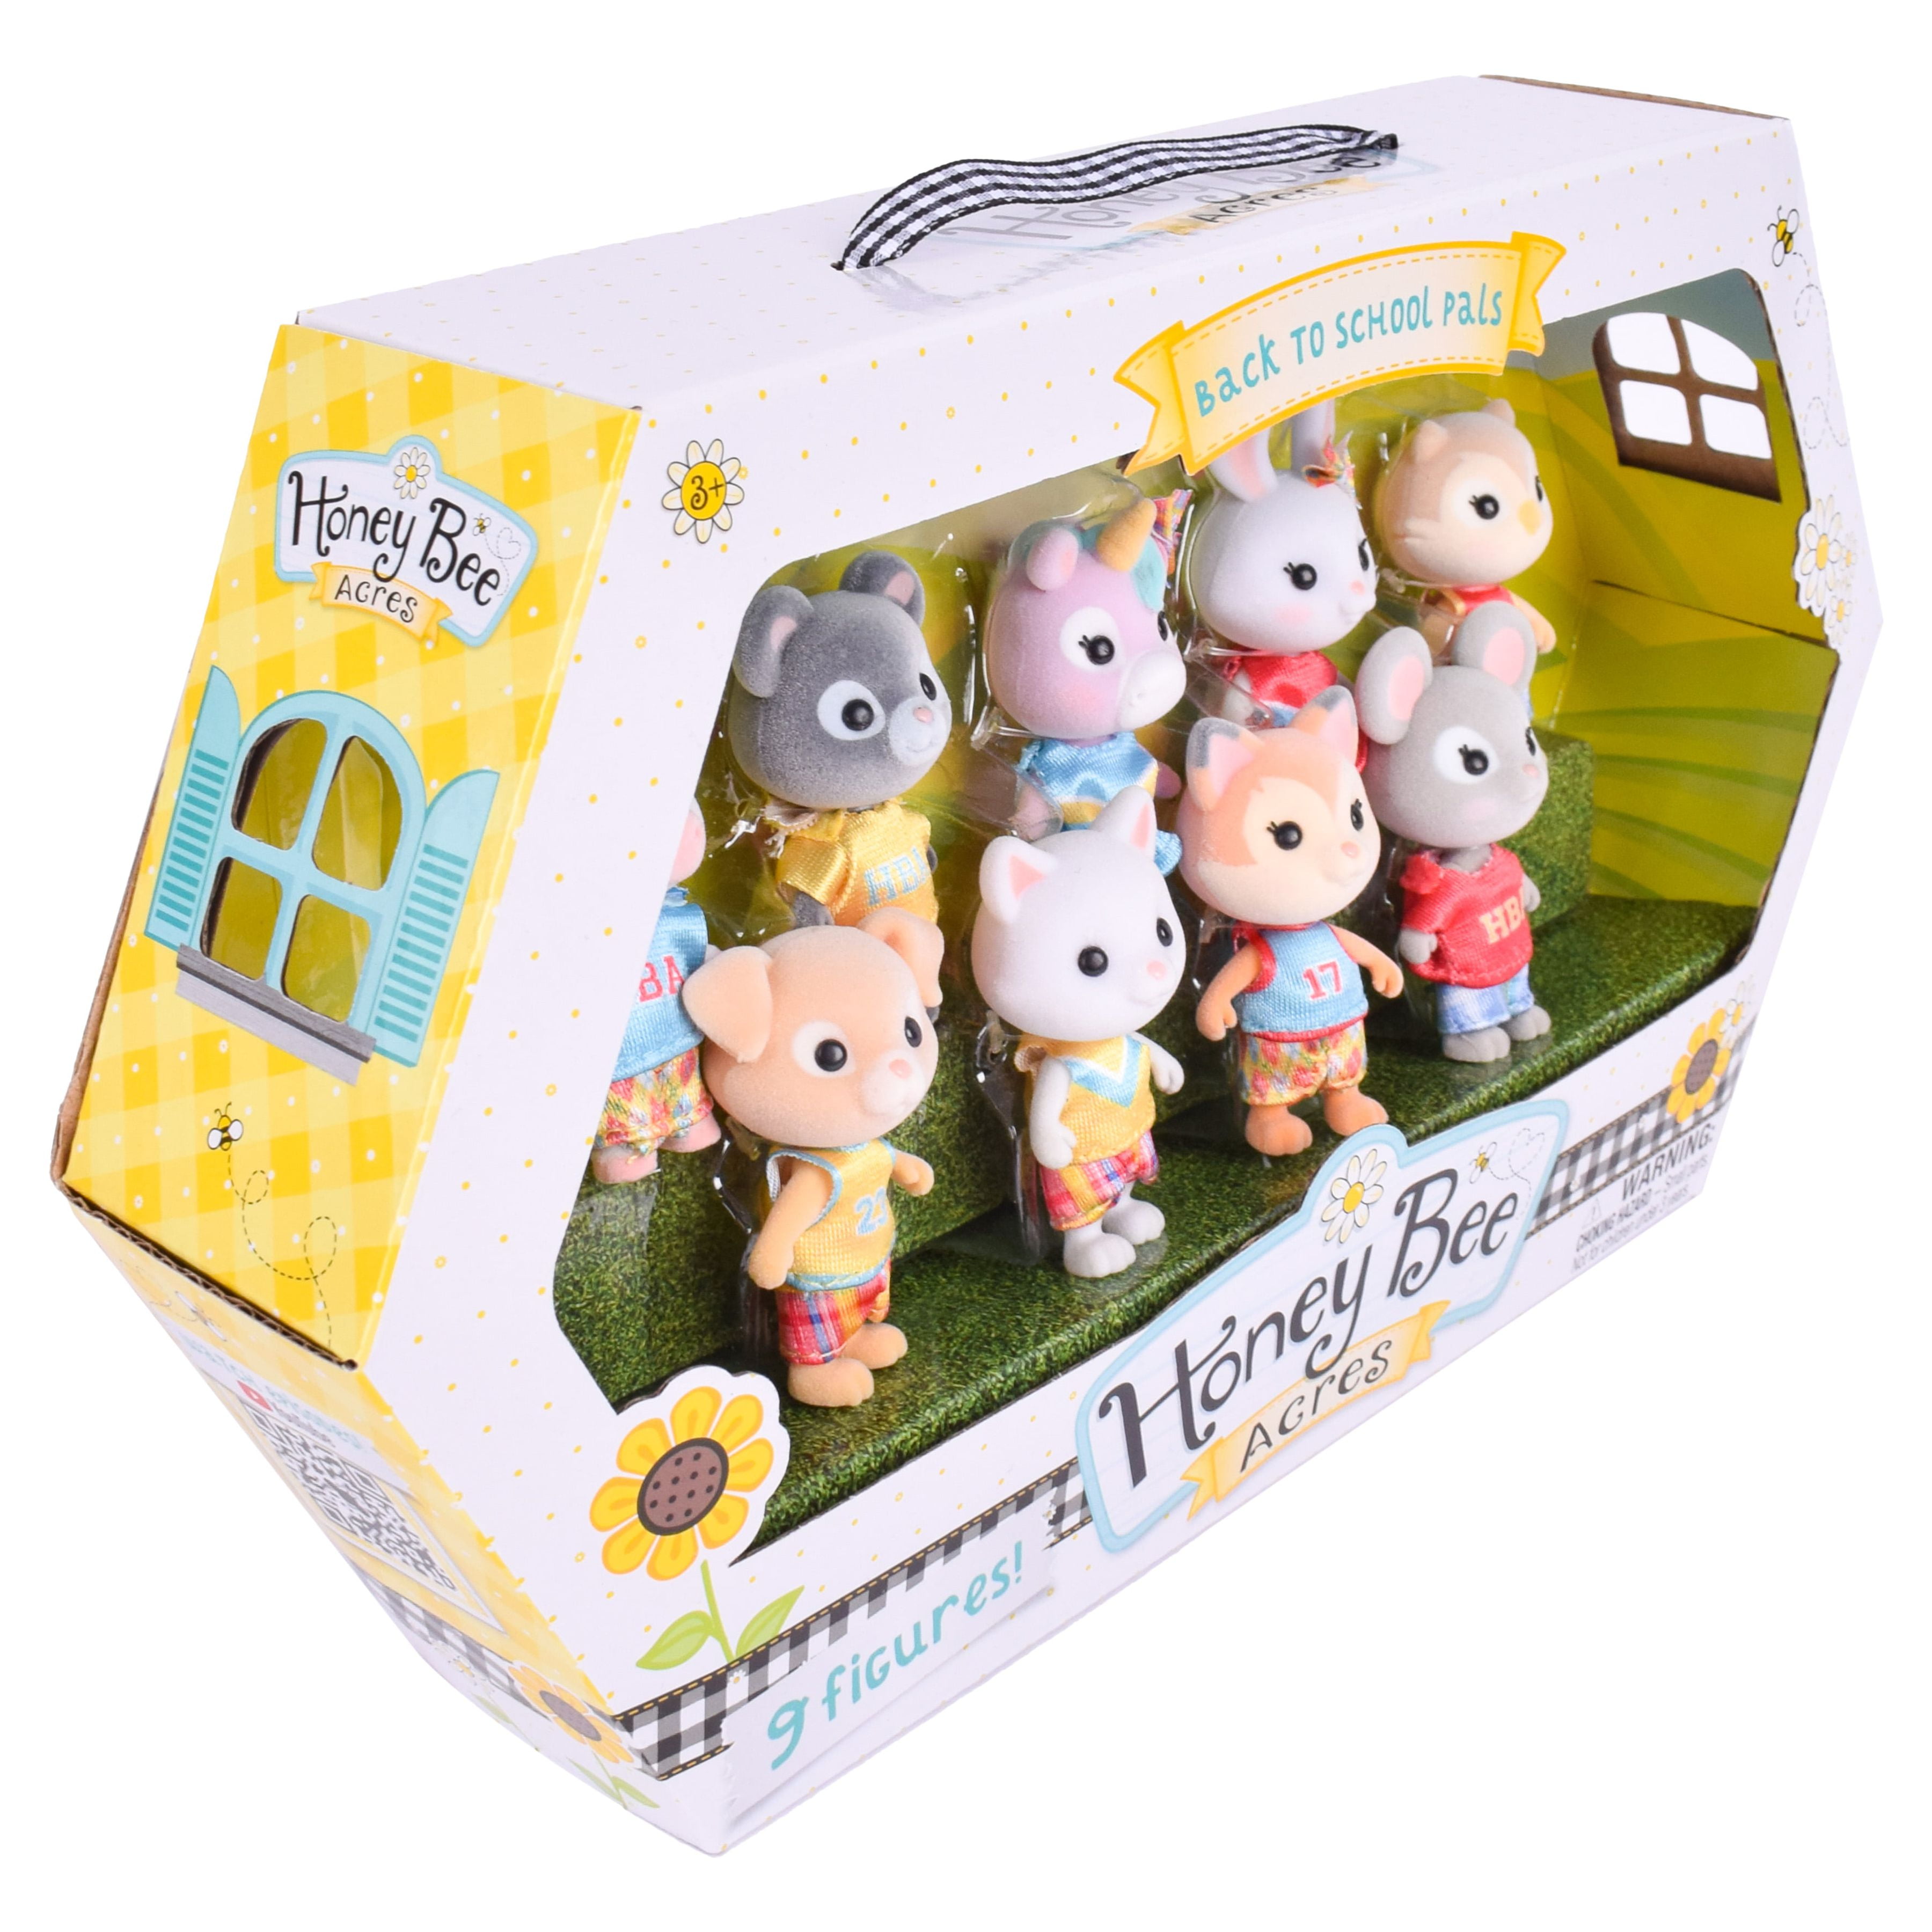 Honey Bee Acres Back to School Pals, 9 Miniature Doll Figures